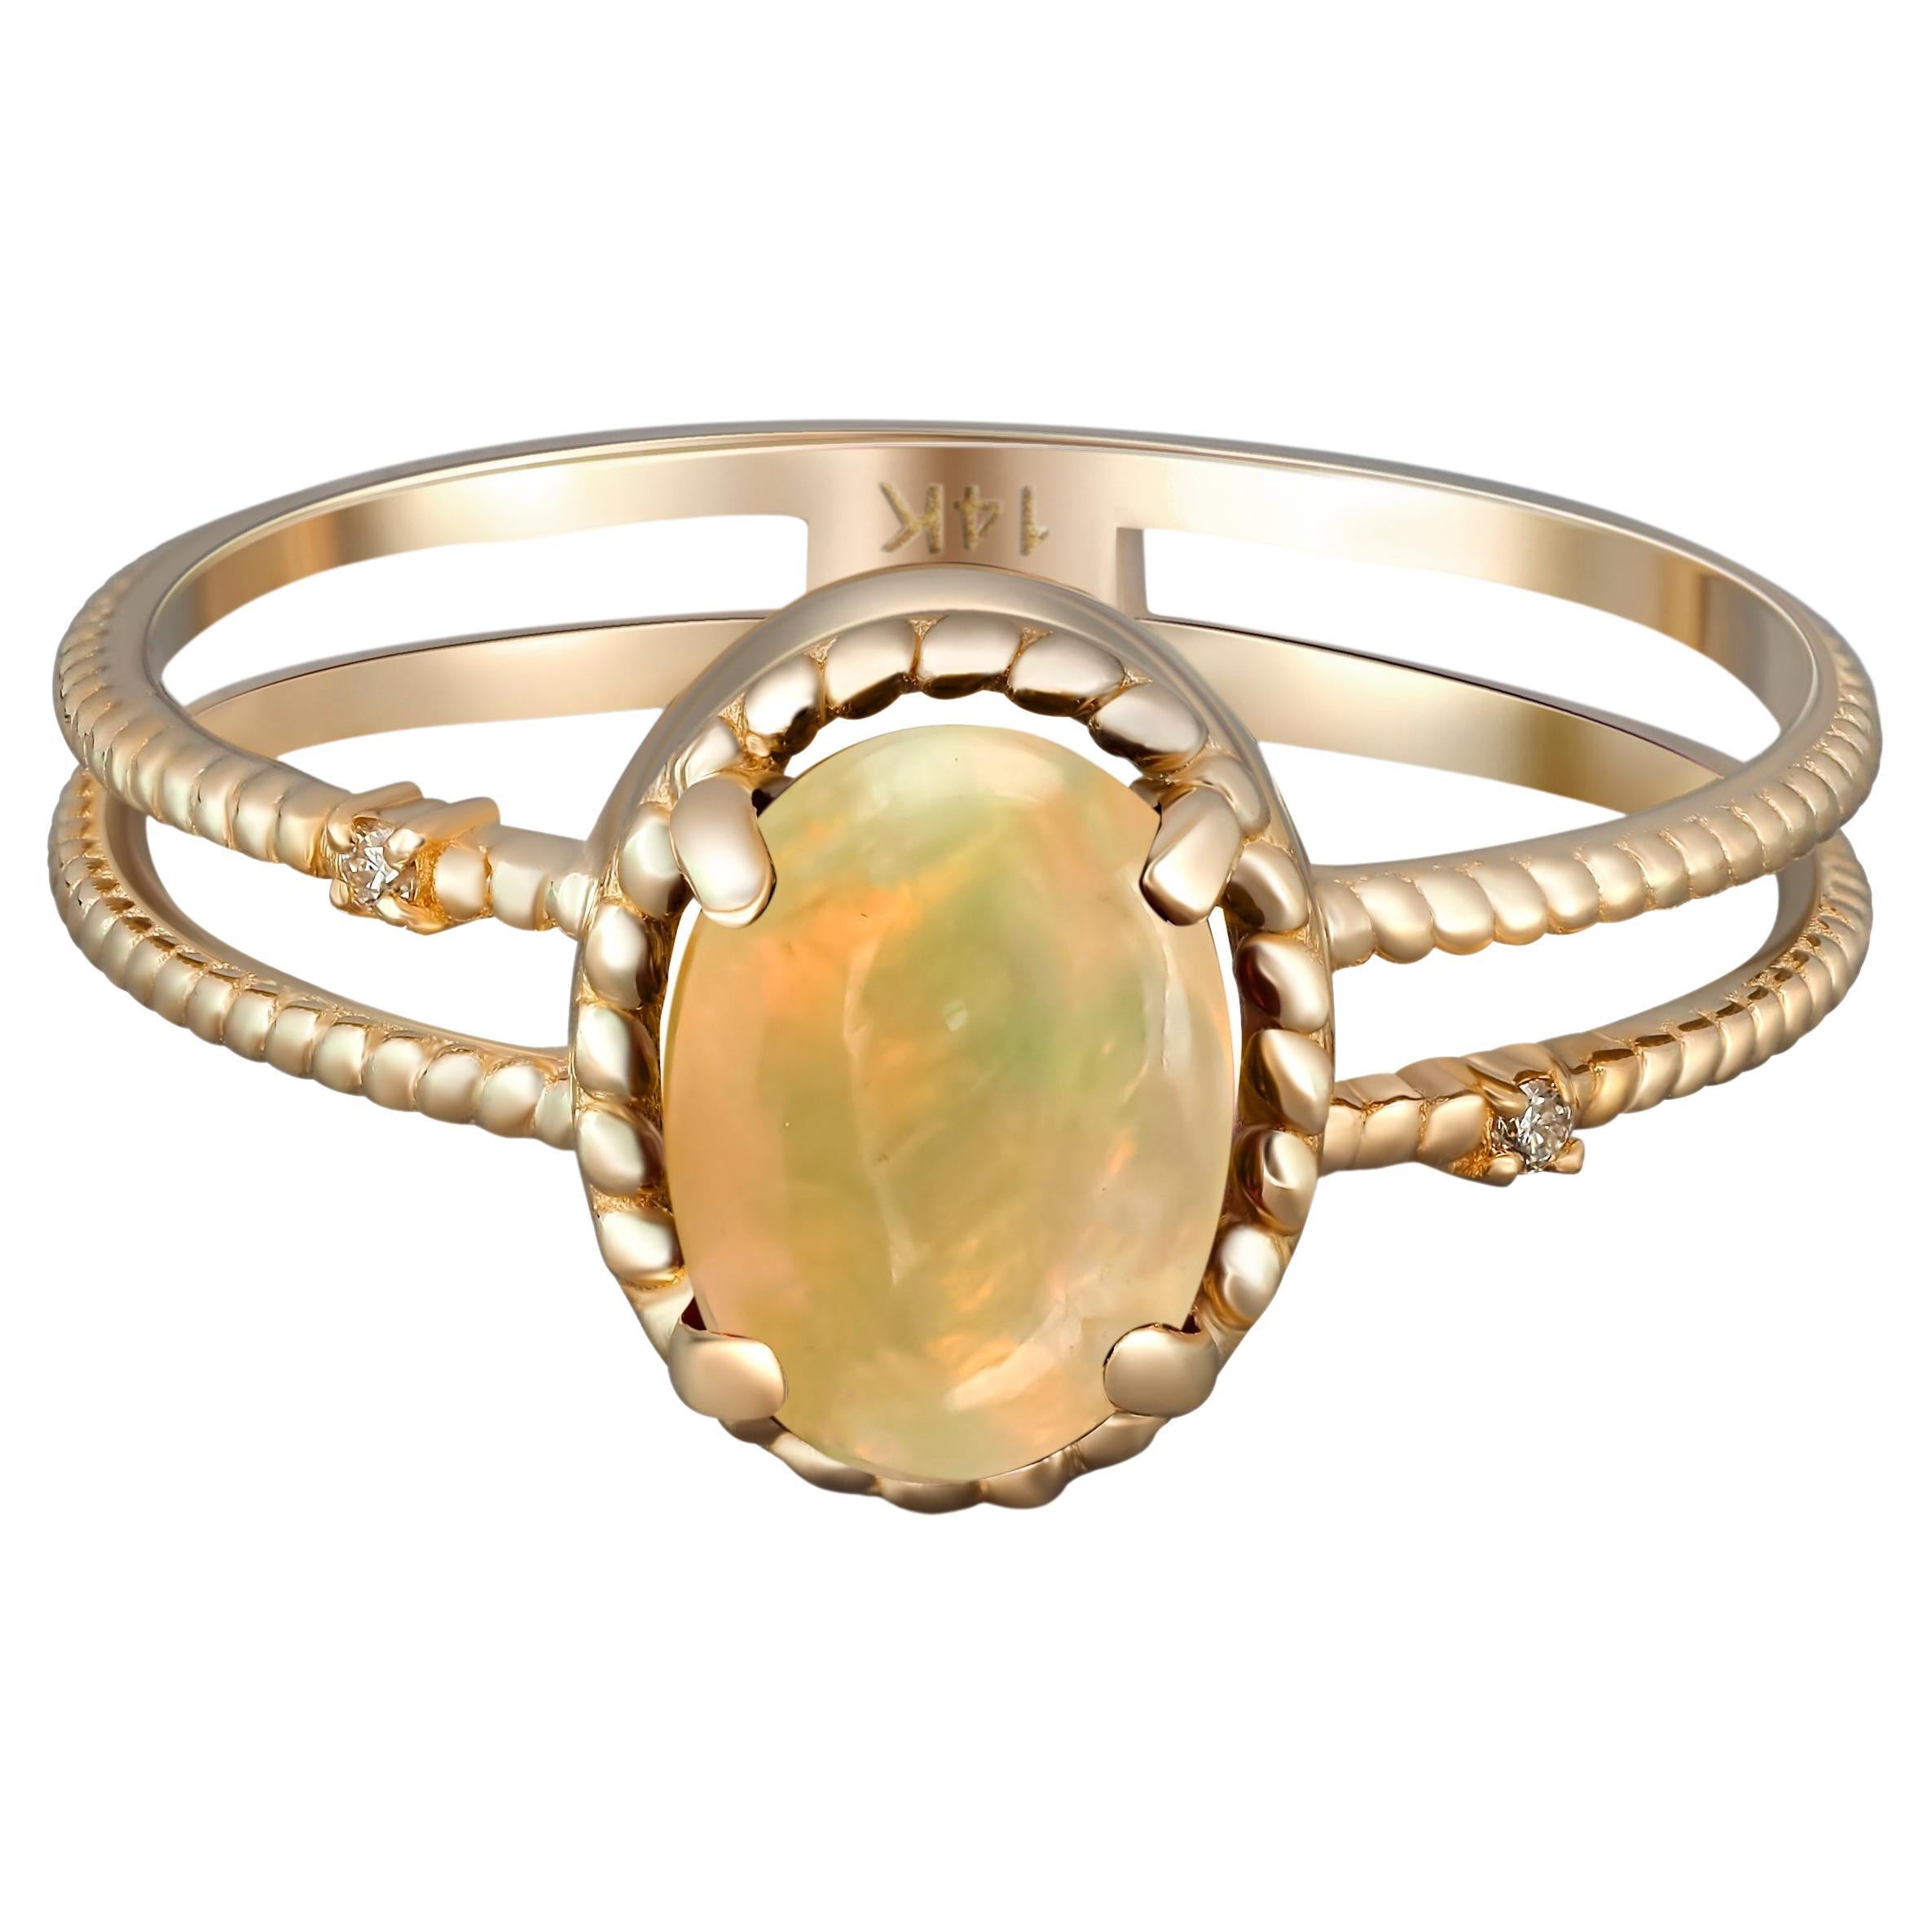 For Sale:  Cabochon Opal Ring. 14k Gold Ring with Opal. Minimalist Opal Ring